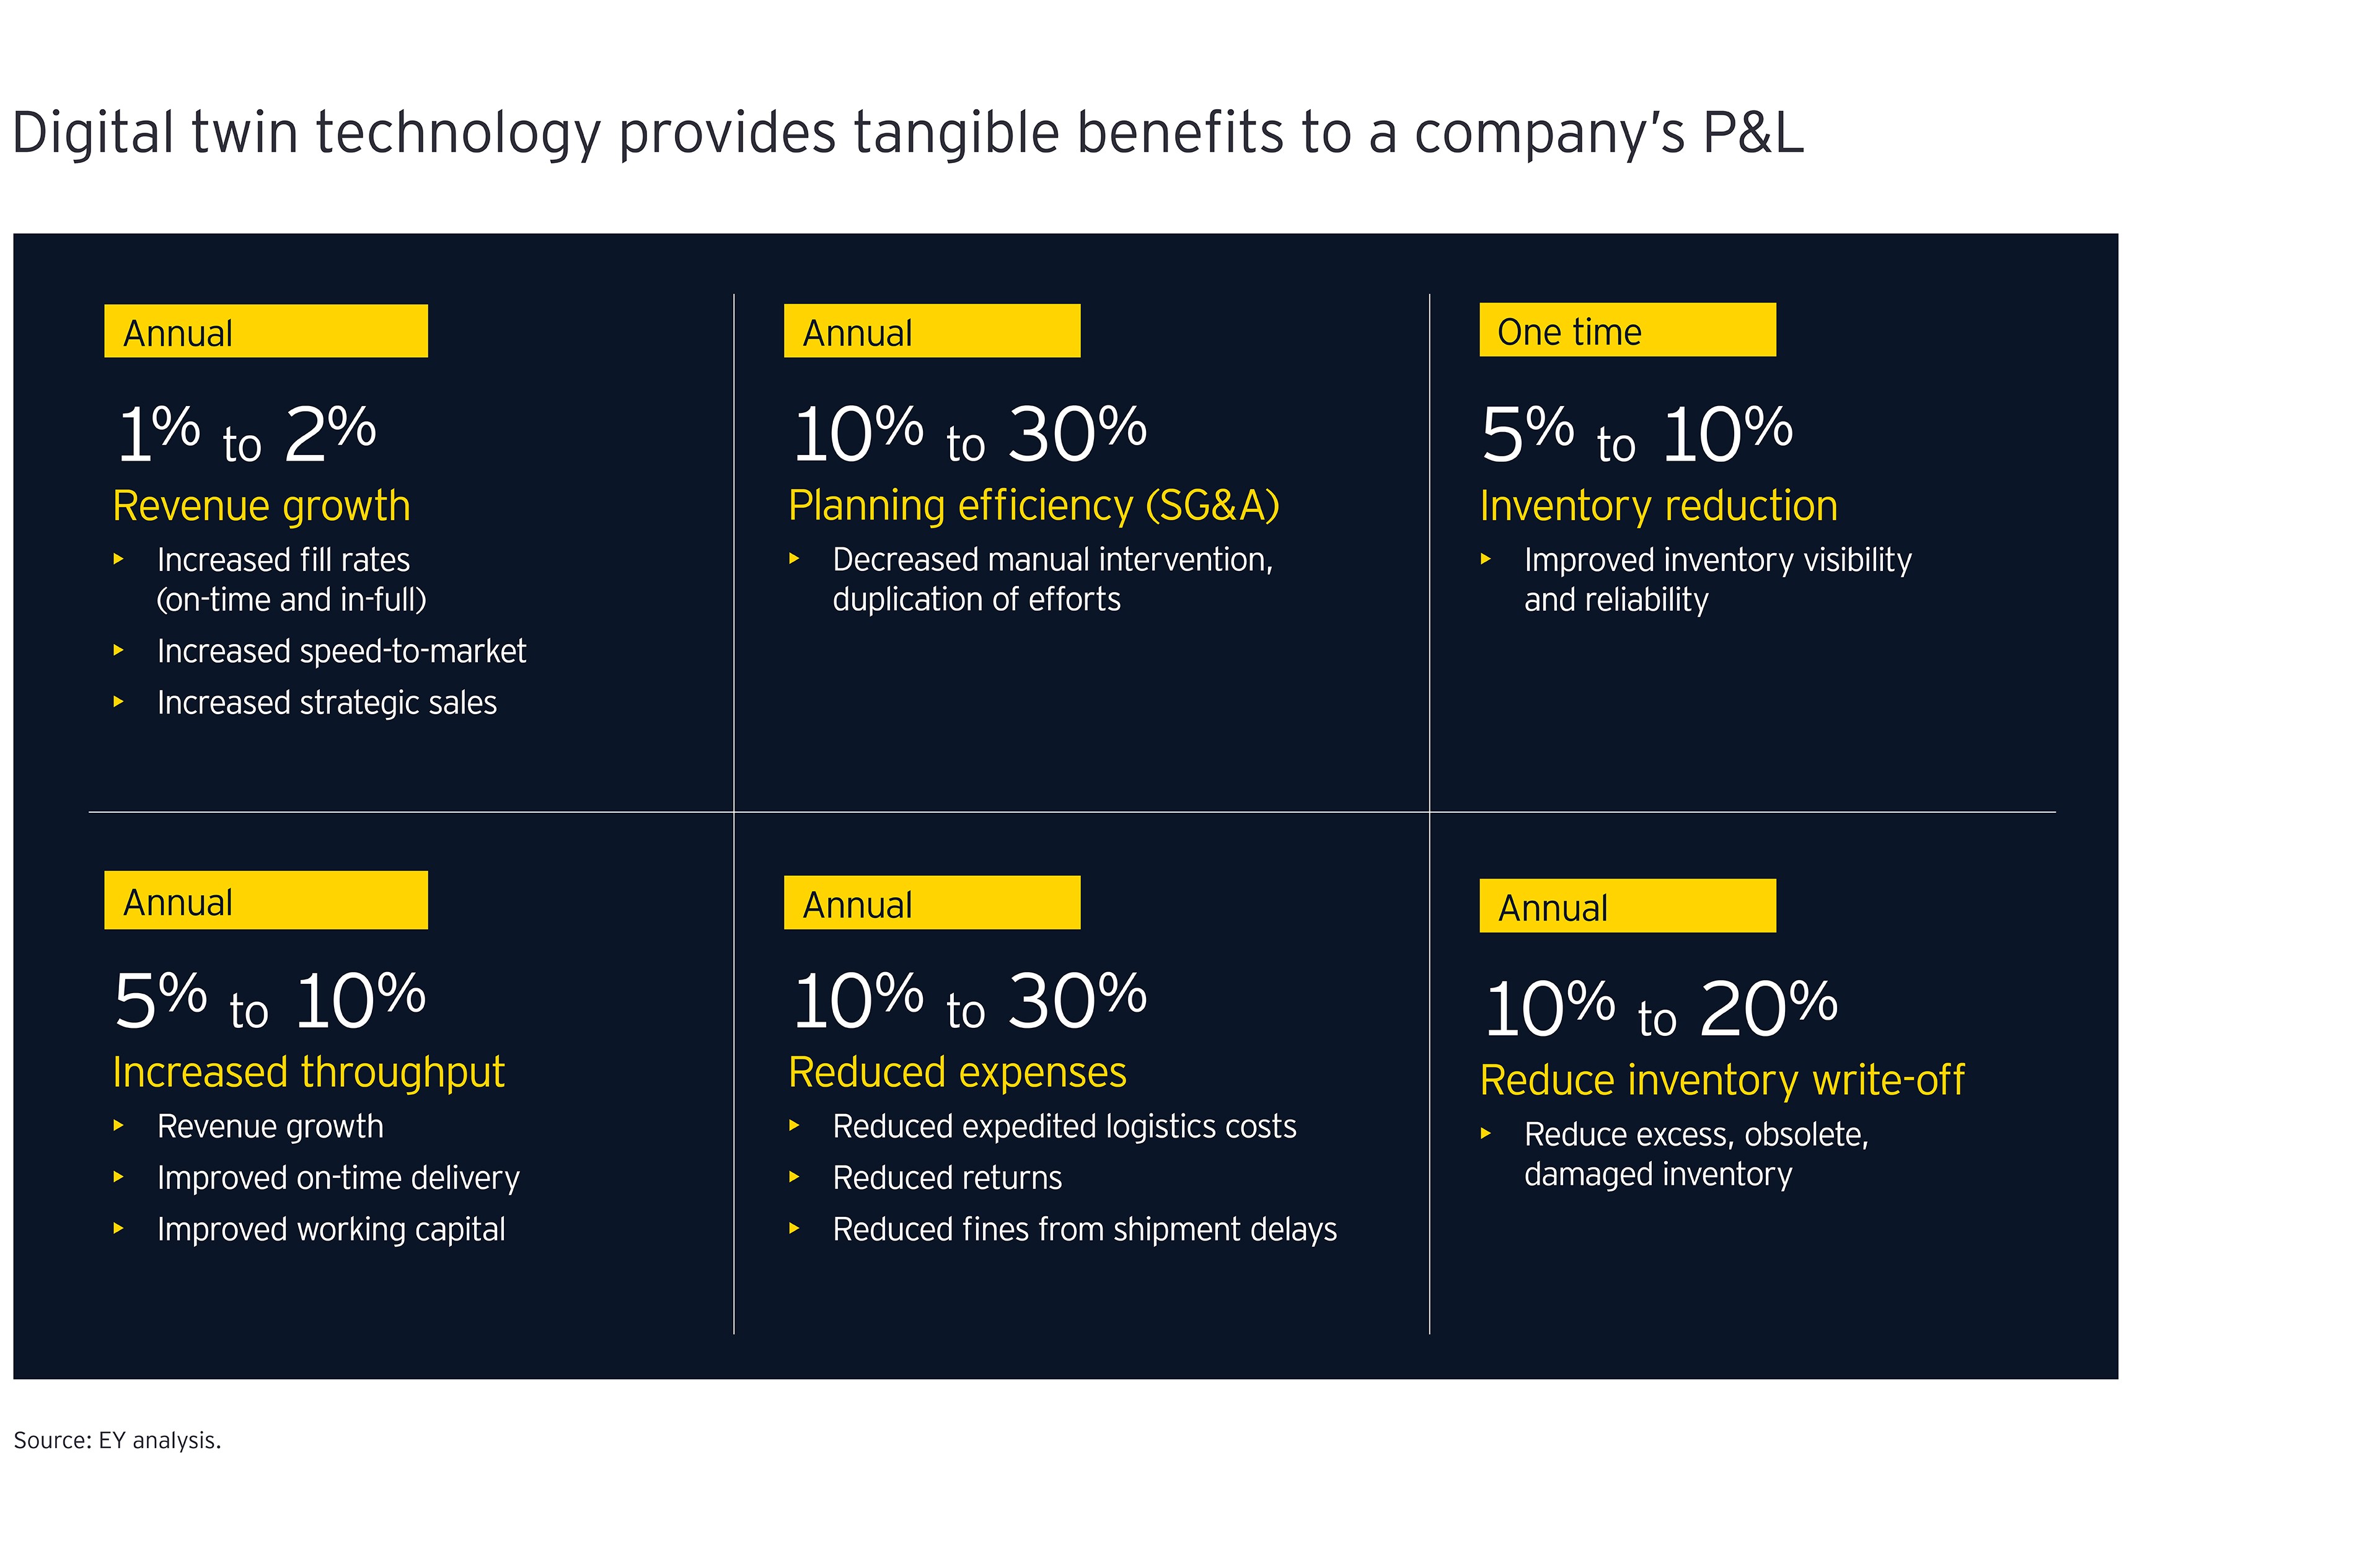 Digital twin technology provides tangible benefits to a company's P&L